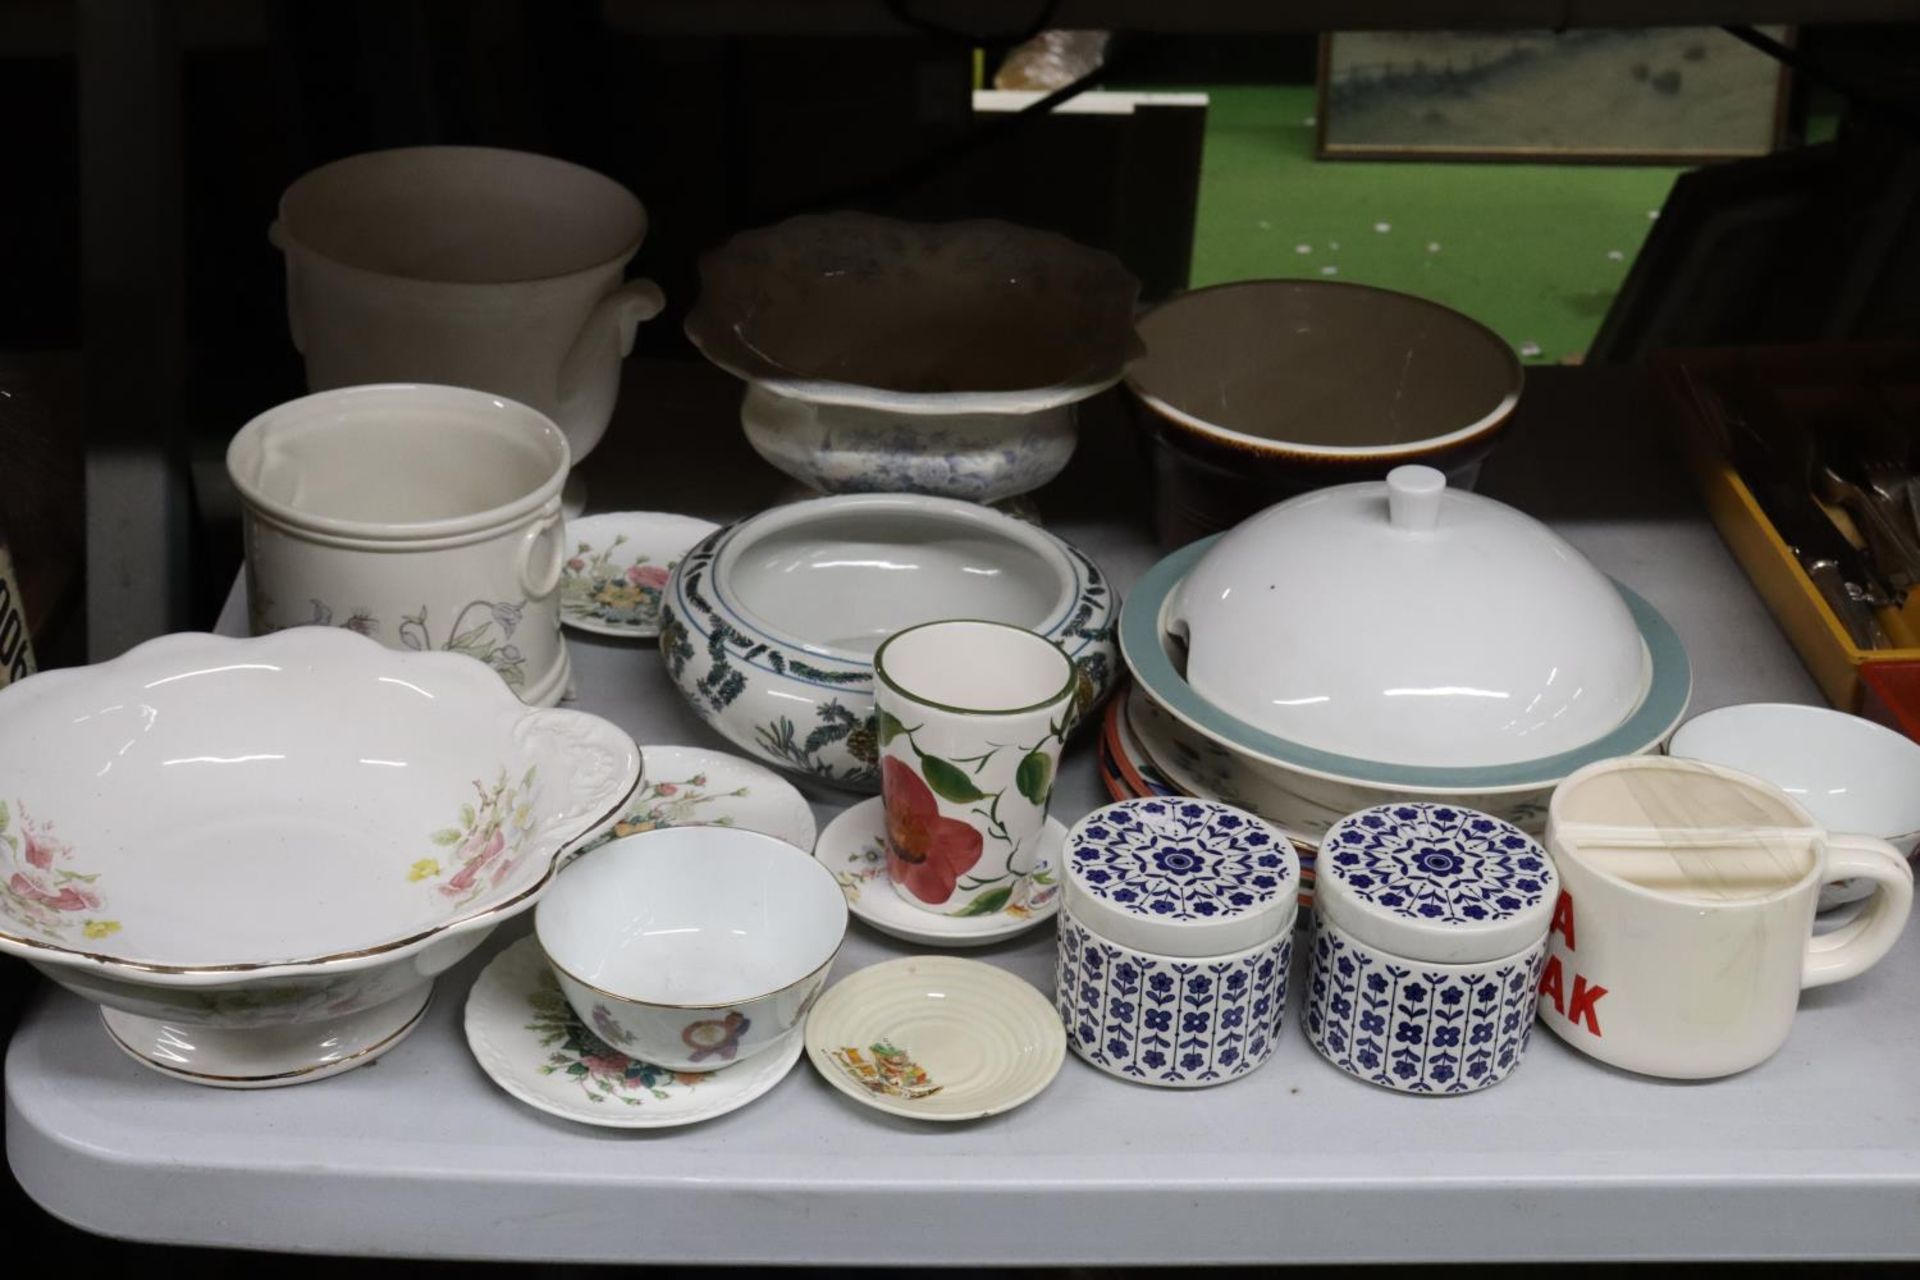 A LARGE QUANTITY OF CERAMICS TO INCLUDE A REGAL COLLECTION FOOTED BOWL, PLANTERS, PLATES, ETC.,